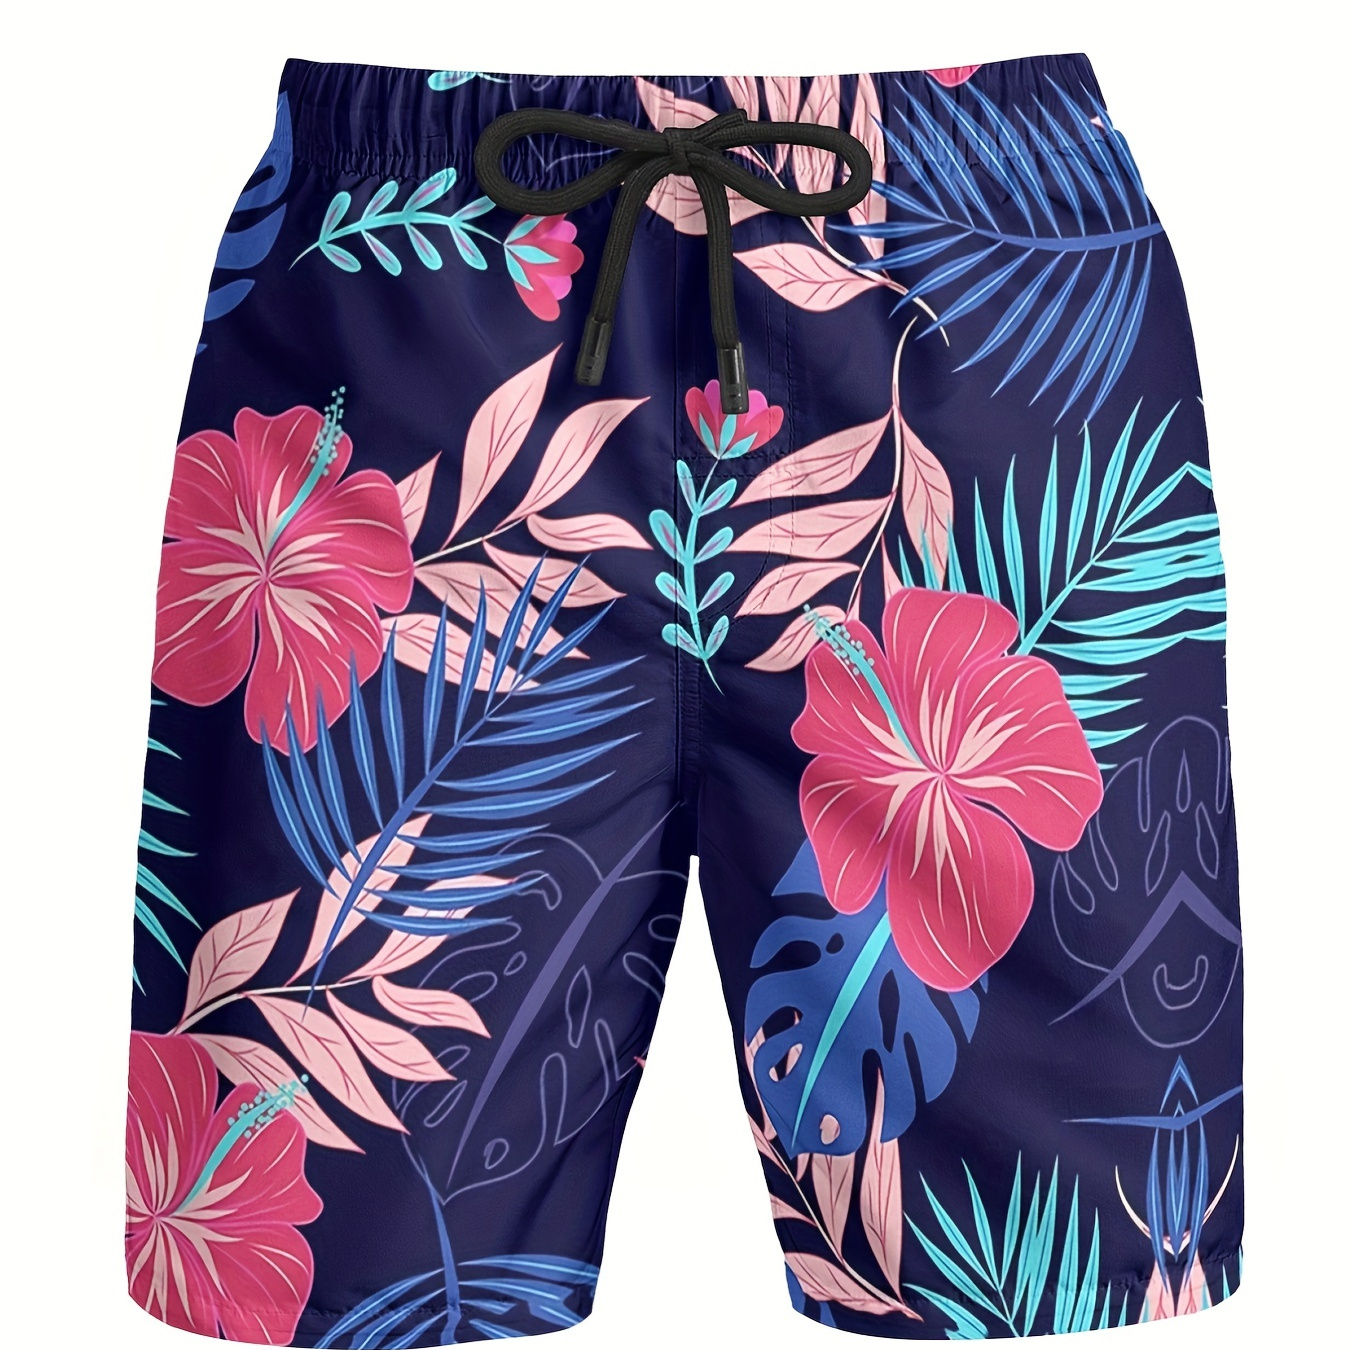 Floral & Leaf Pattern Quick Drying Beach Shorts, Men's Casual Waist  Drawstring Shorts For Summer Resort